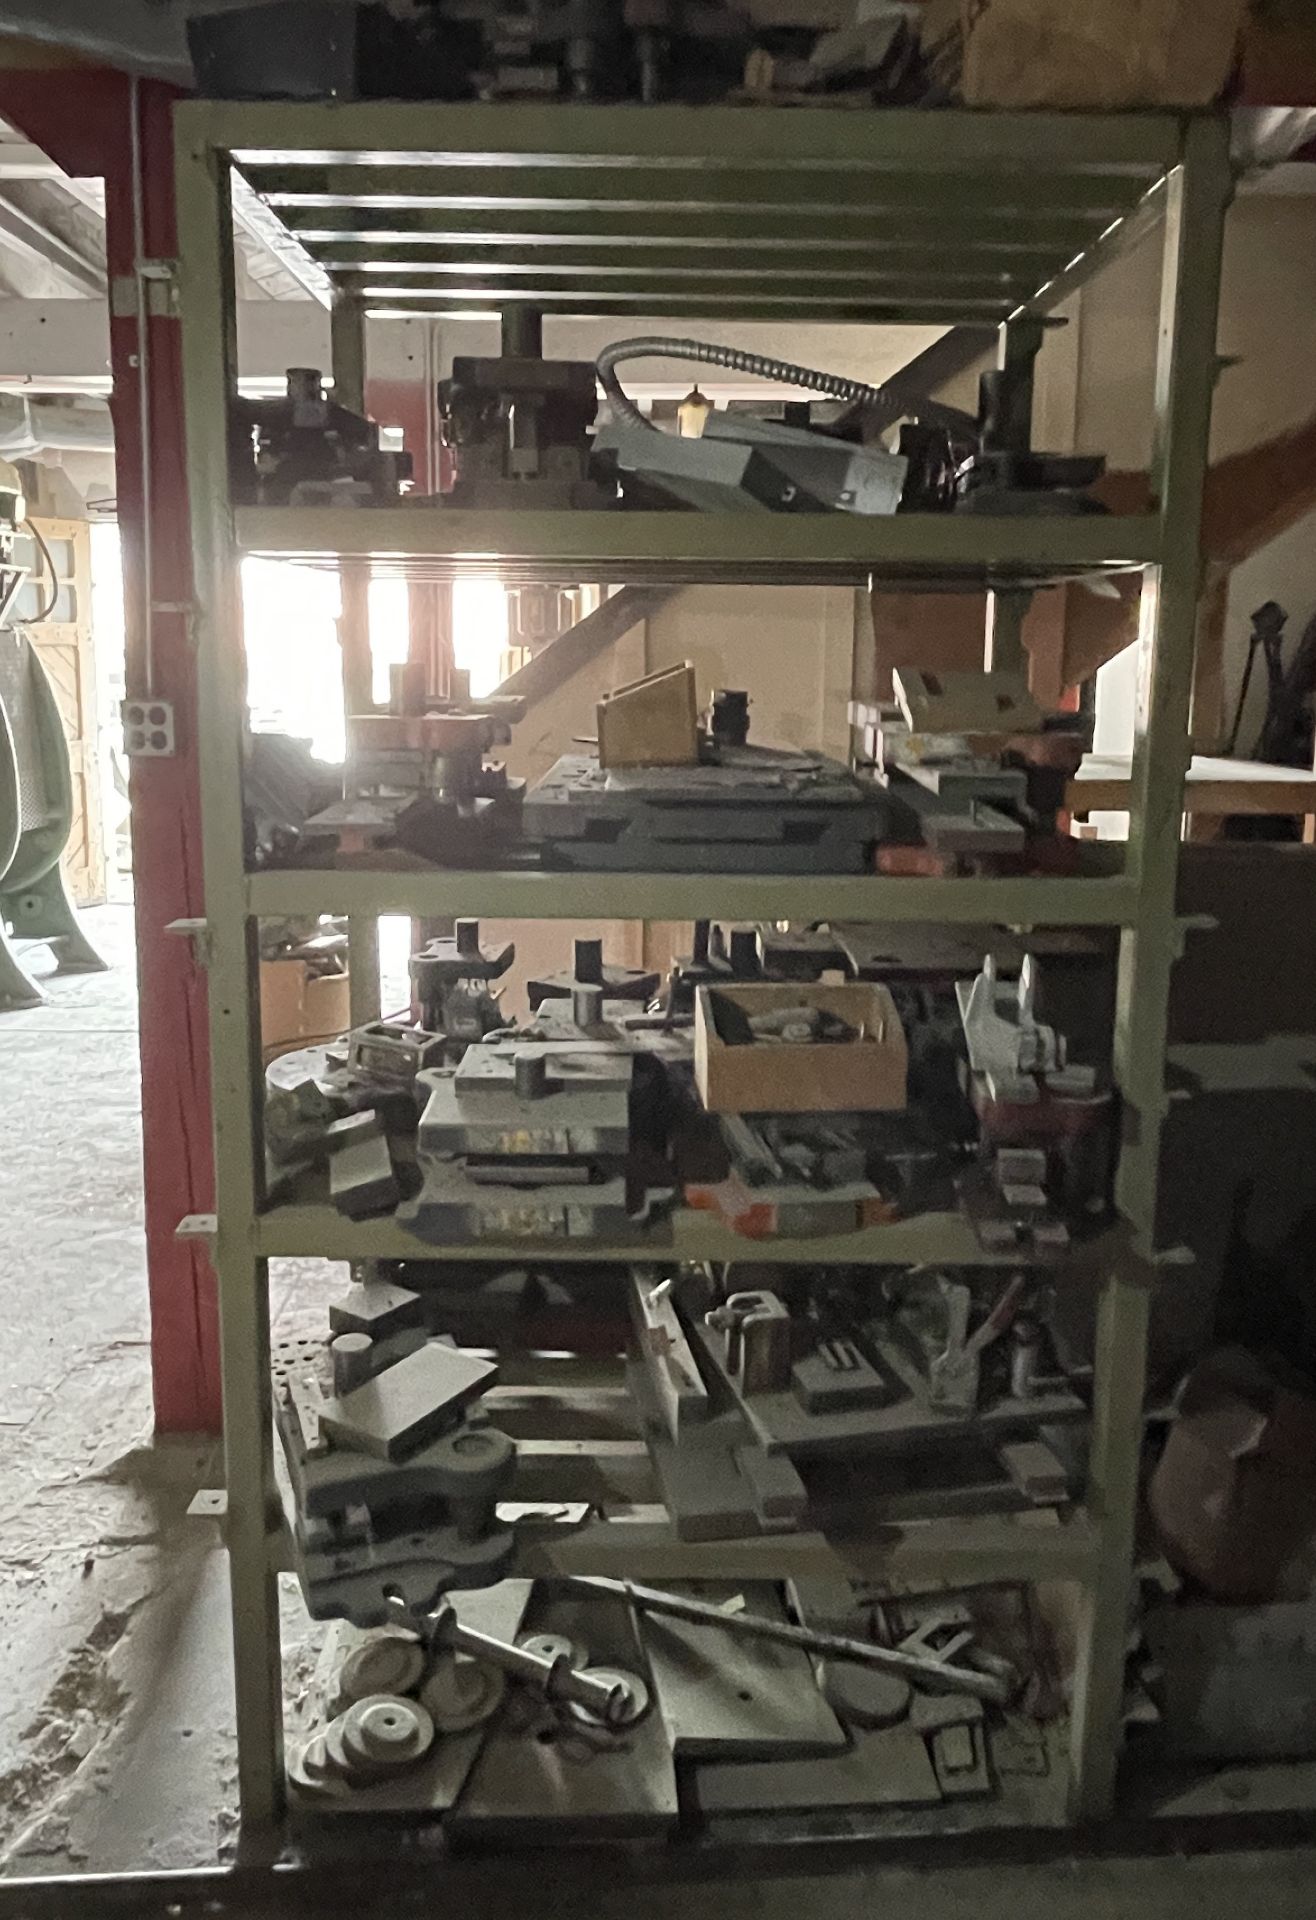 ENTIRE SHELF UNIT FULL OF TOOLING AND PRESS DIES